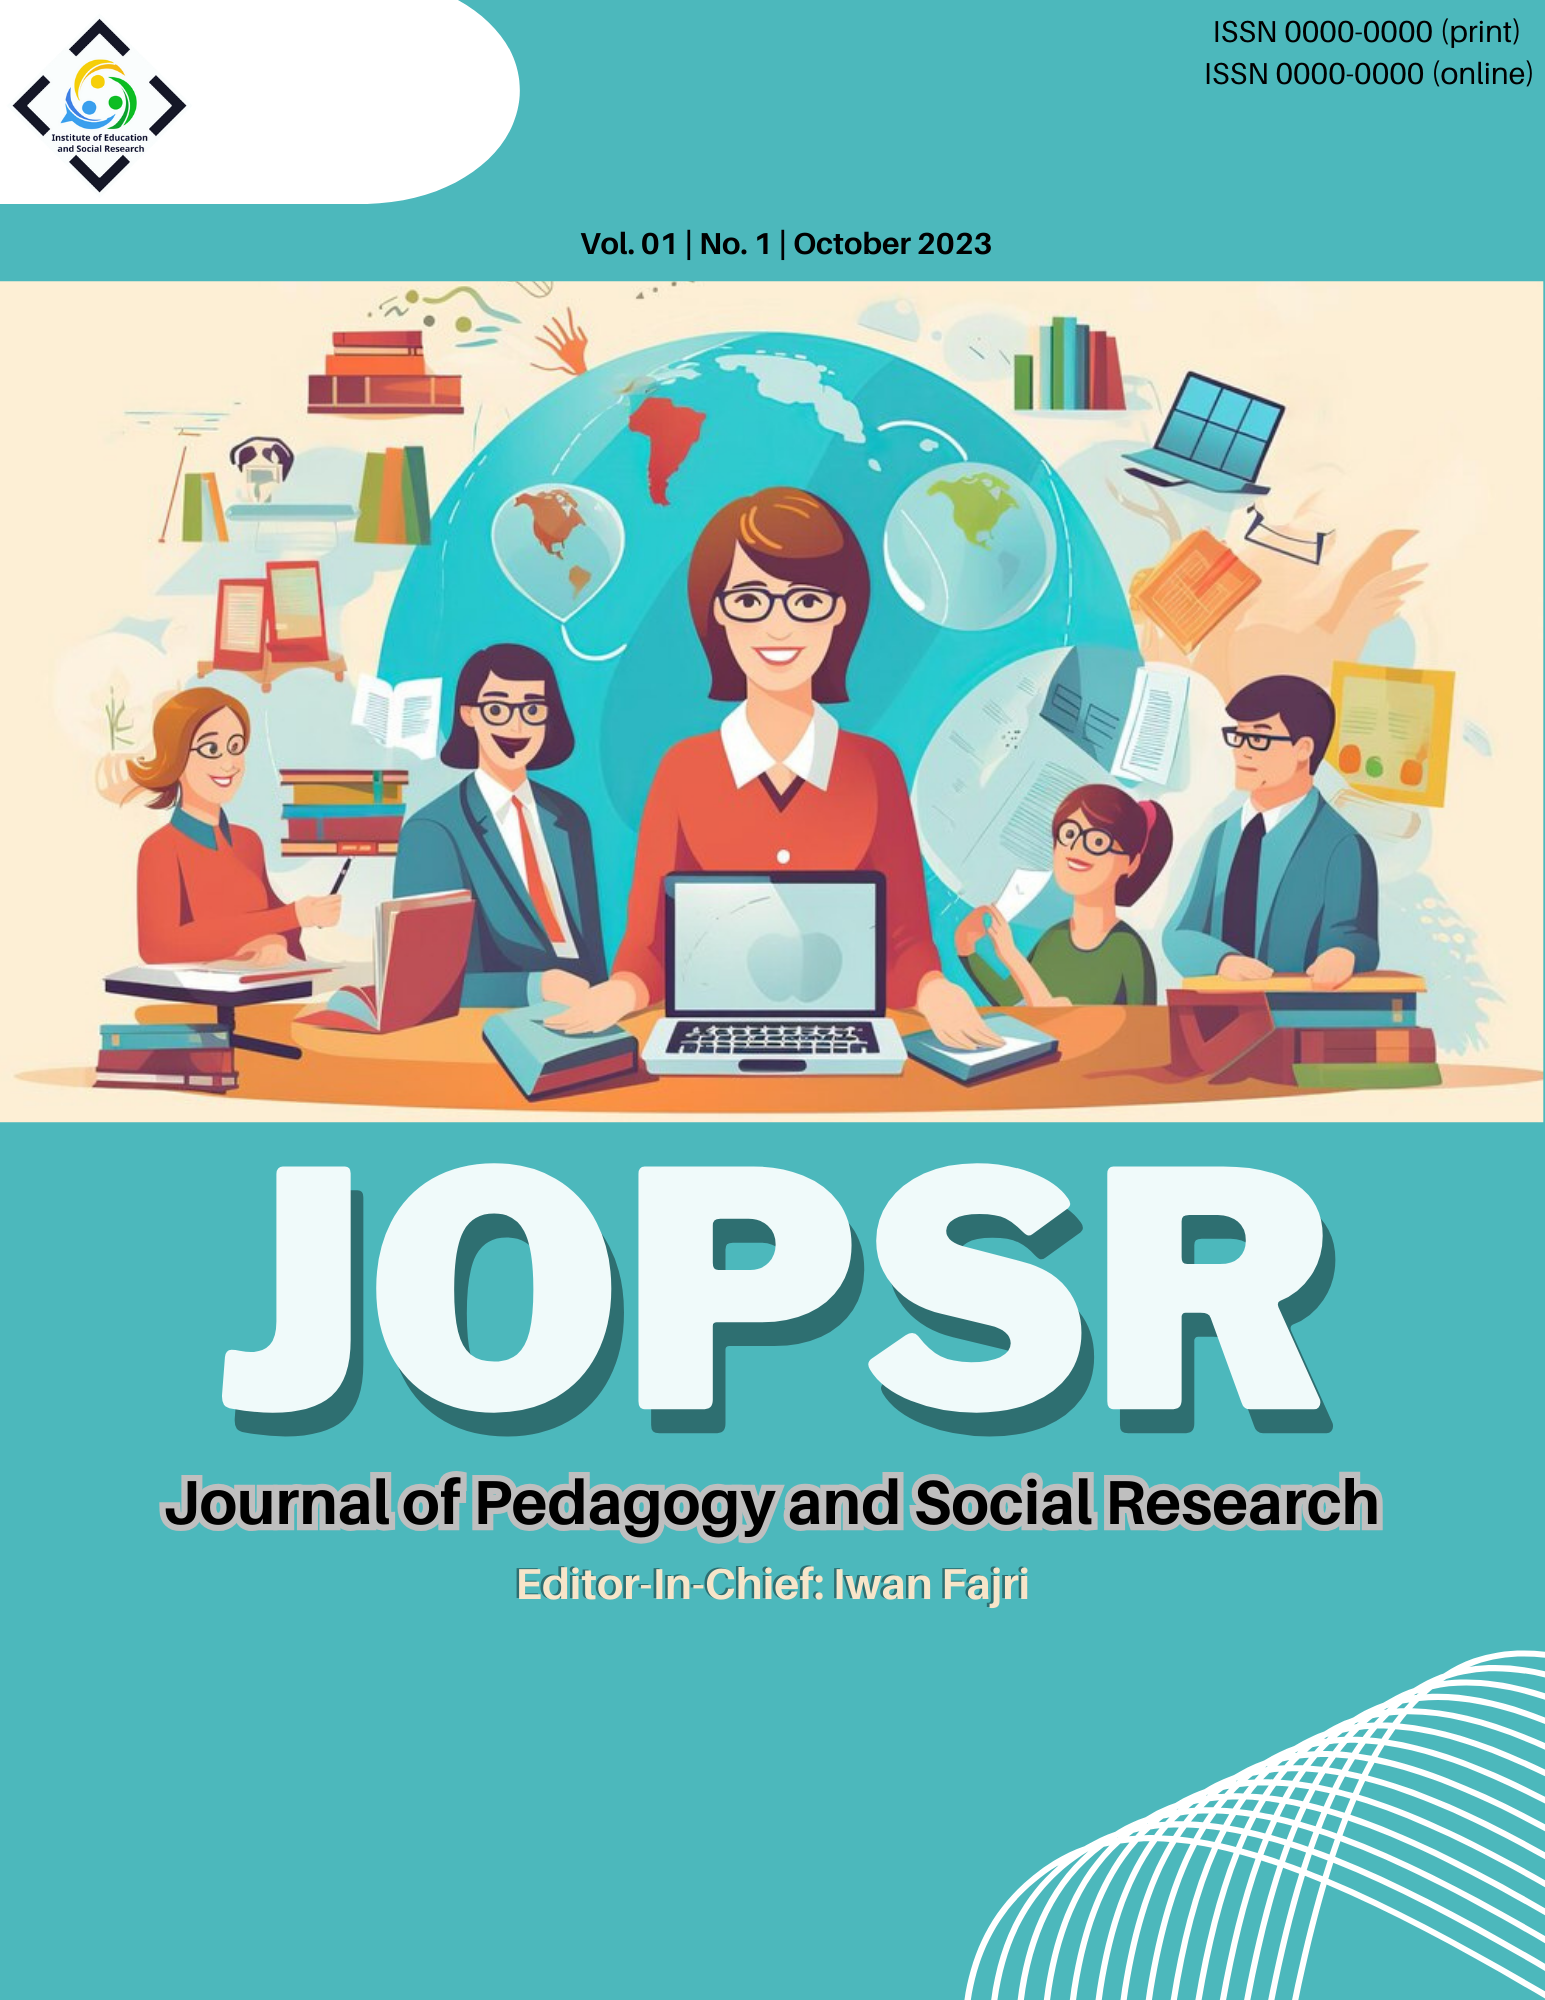  Journal of Pedagogy and Social Research